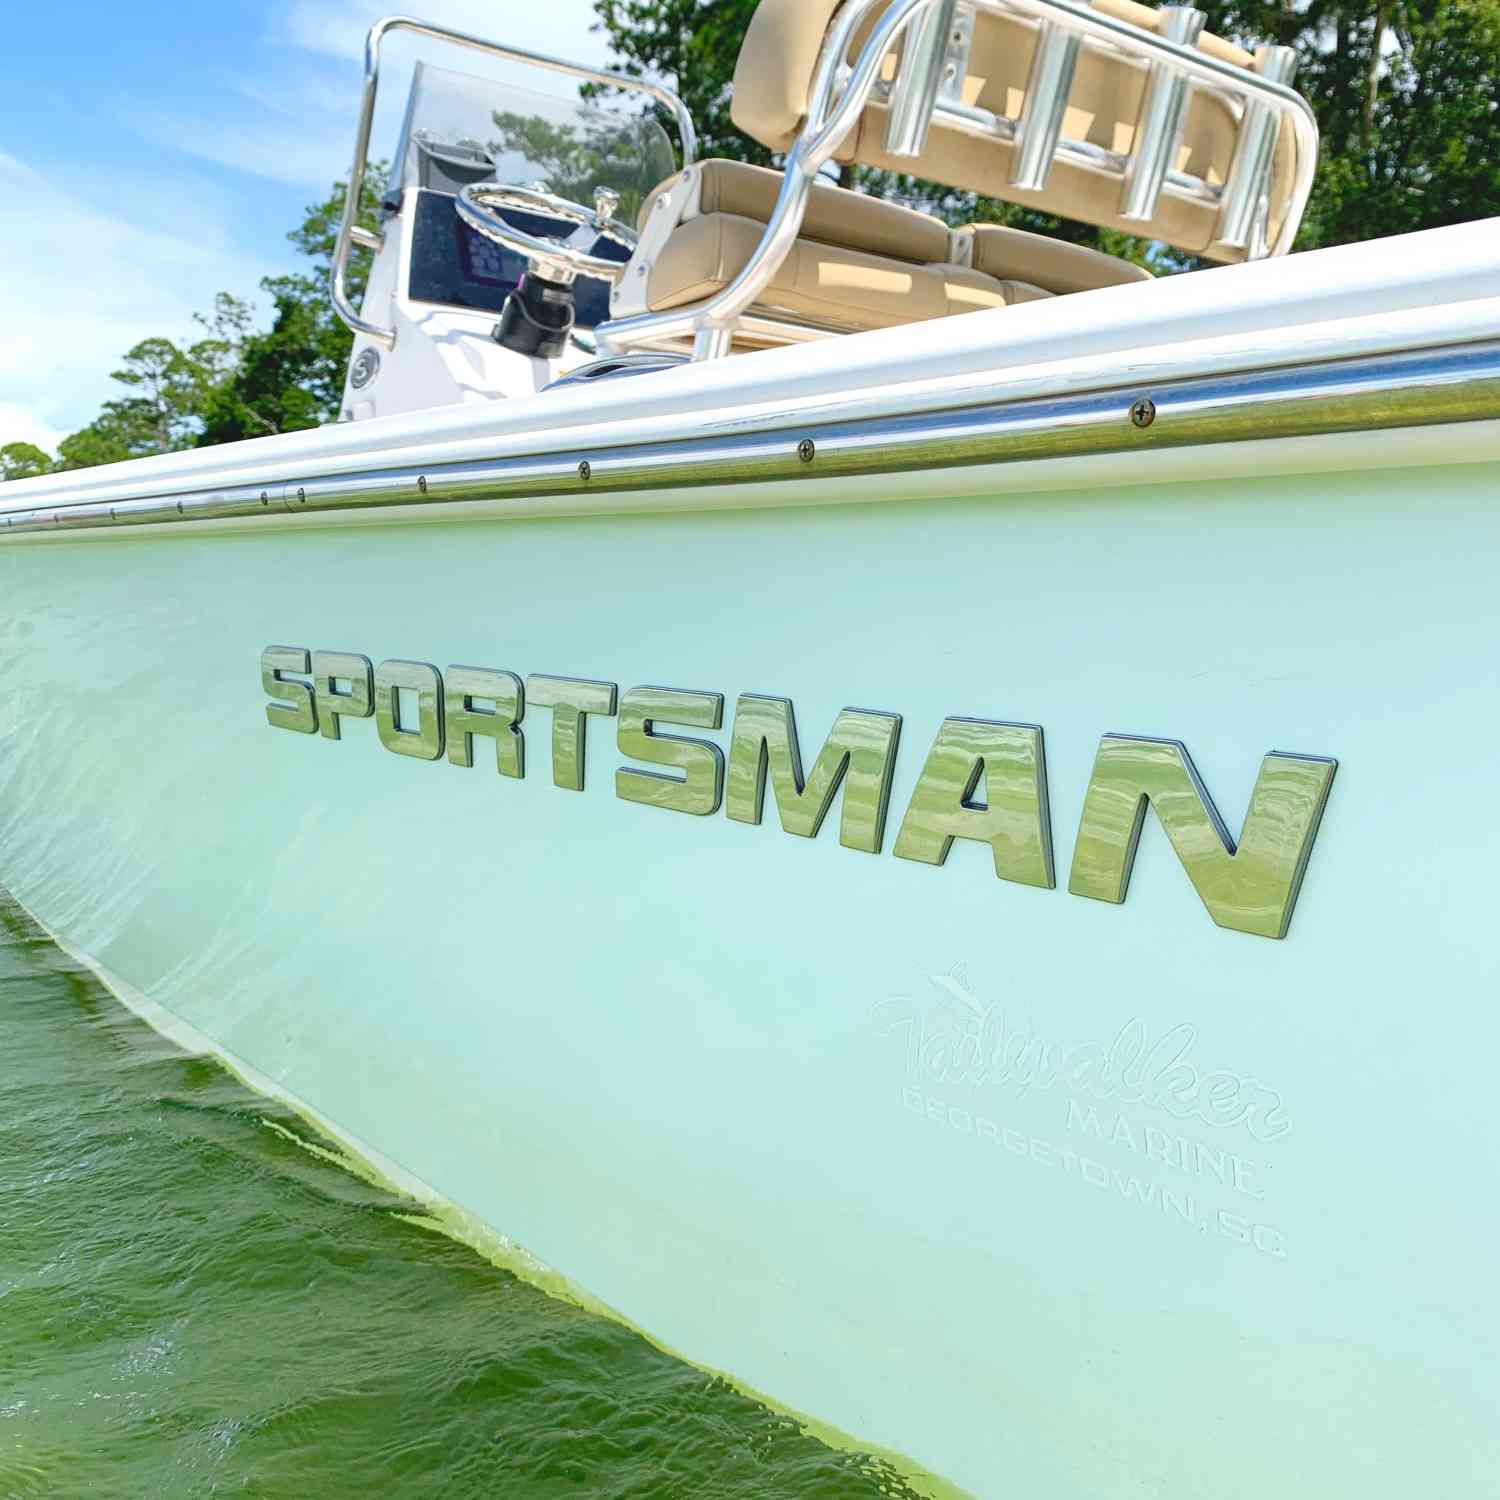 Title: Summer days on Kingsley Lake - On board their Sportsman Masters 207 Bay Boat - Location: Kingsley Lake, FL. Participating in the Photo Contest #SportsmanApril2020